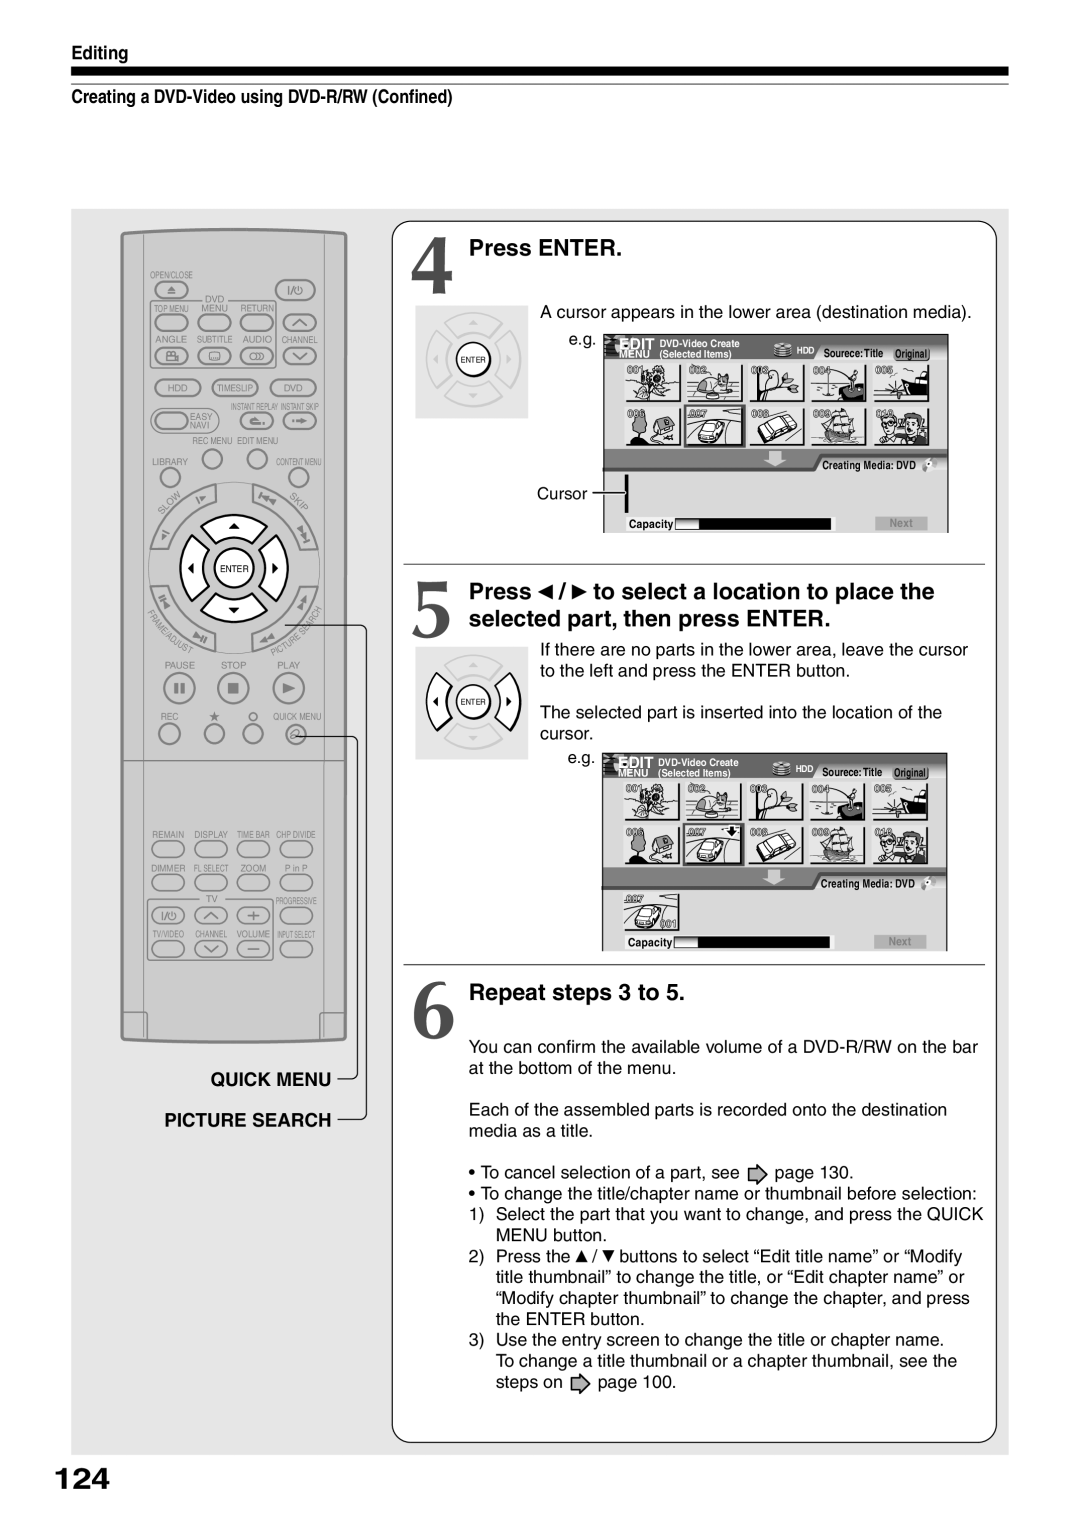 Toshiba RD-XS32SC Repeat steps 3 to, Creating a DVD-Videousing DVD-R/RWConfined, Quick Menu Picture Search, Press ENTER 